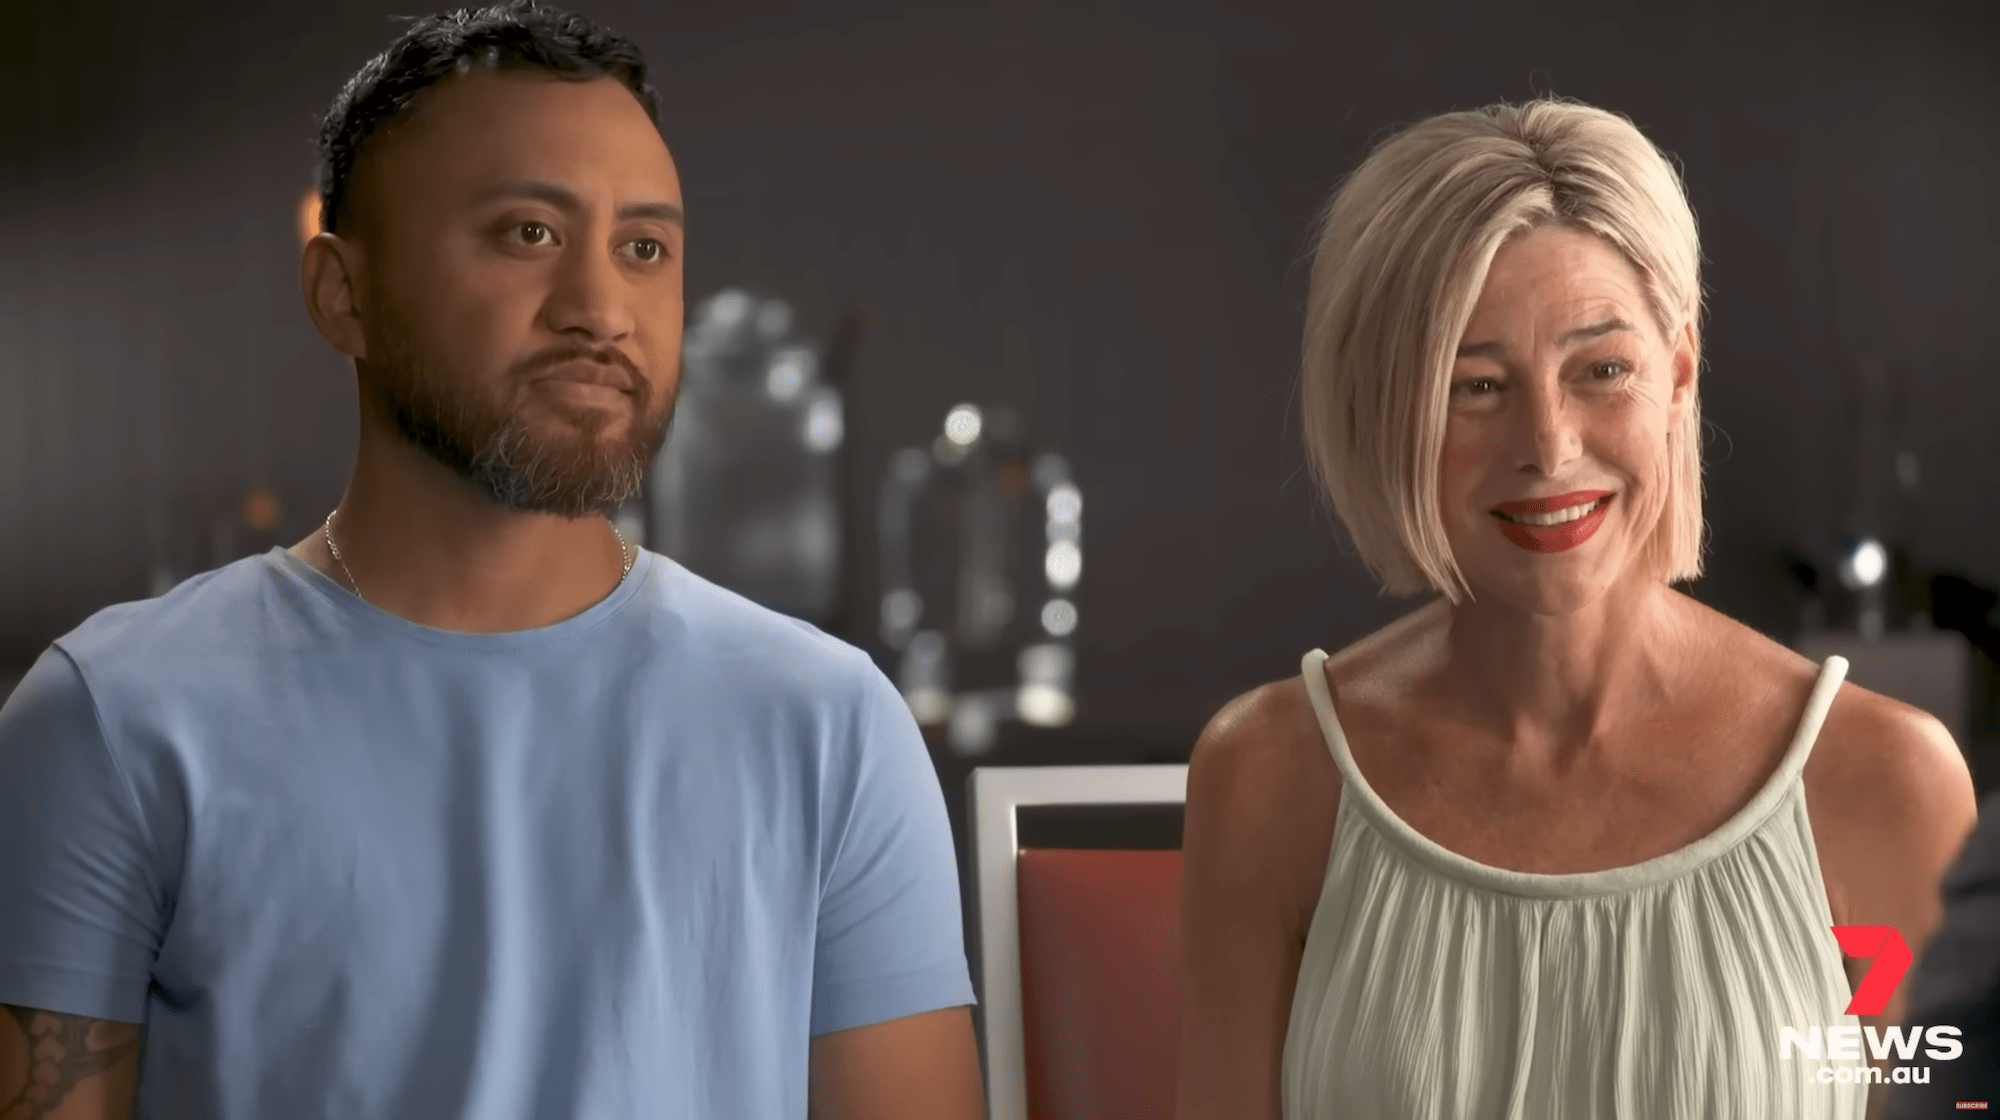 May December' Team Weighs in on Mary Kay Letourneau Comparisons